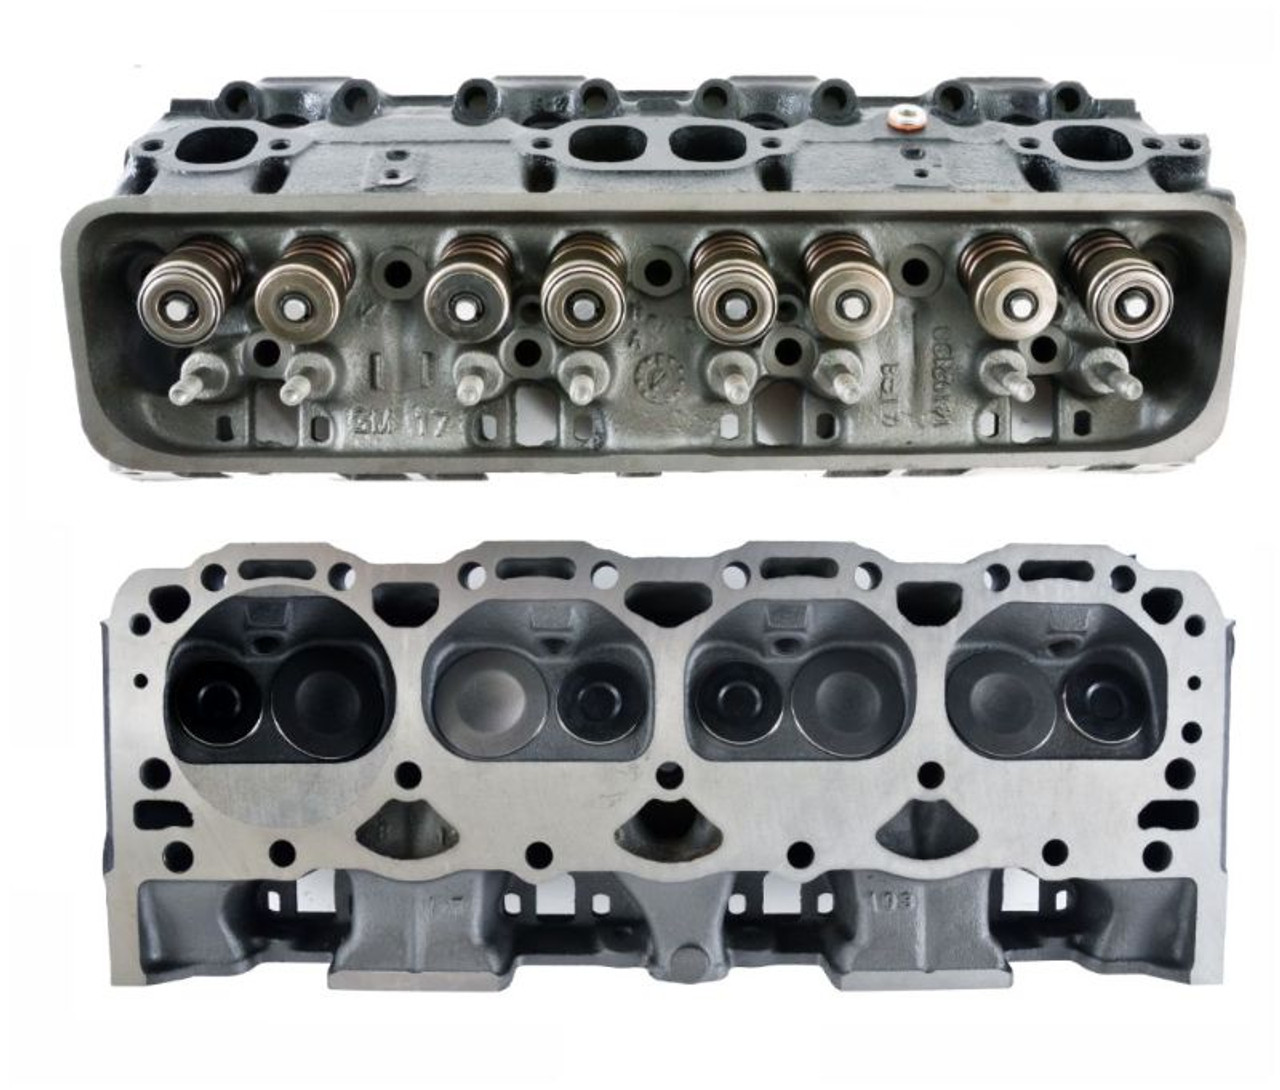 Cylinder Head Assembly - 1991 Chevrolet G10 5.7L (CH1064R.K148)